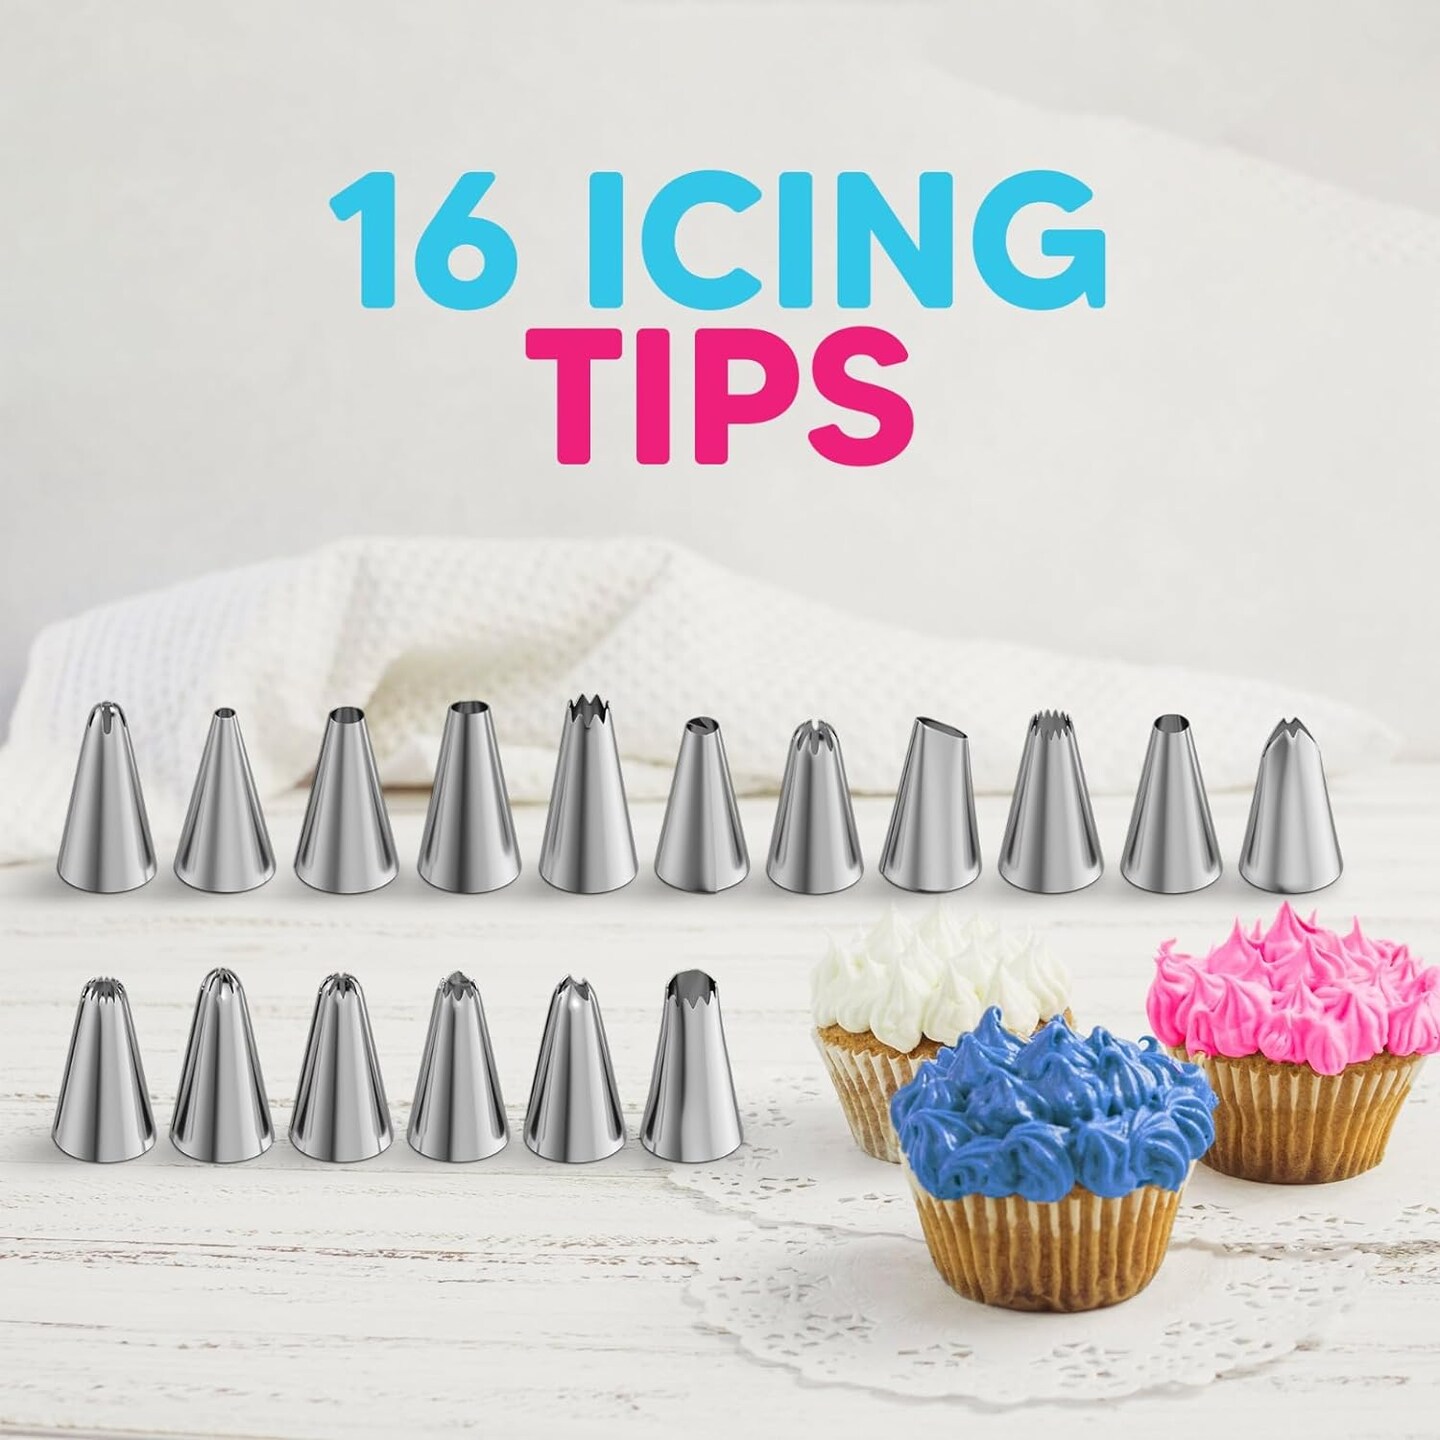 Essential Set of Piping Bags and Tips for Creative Decorating